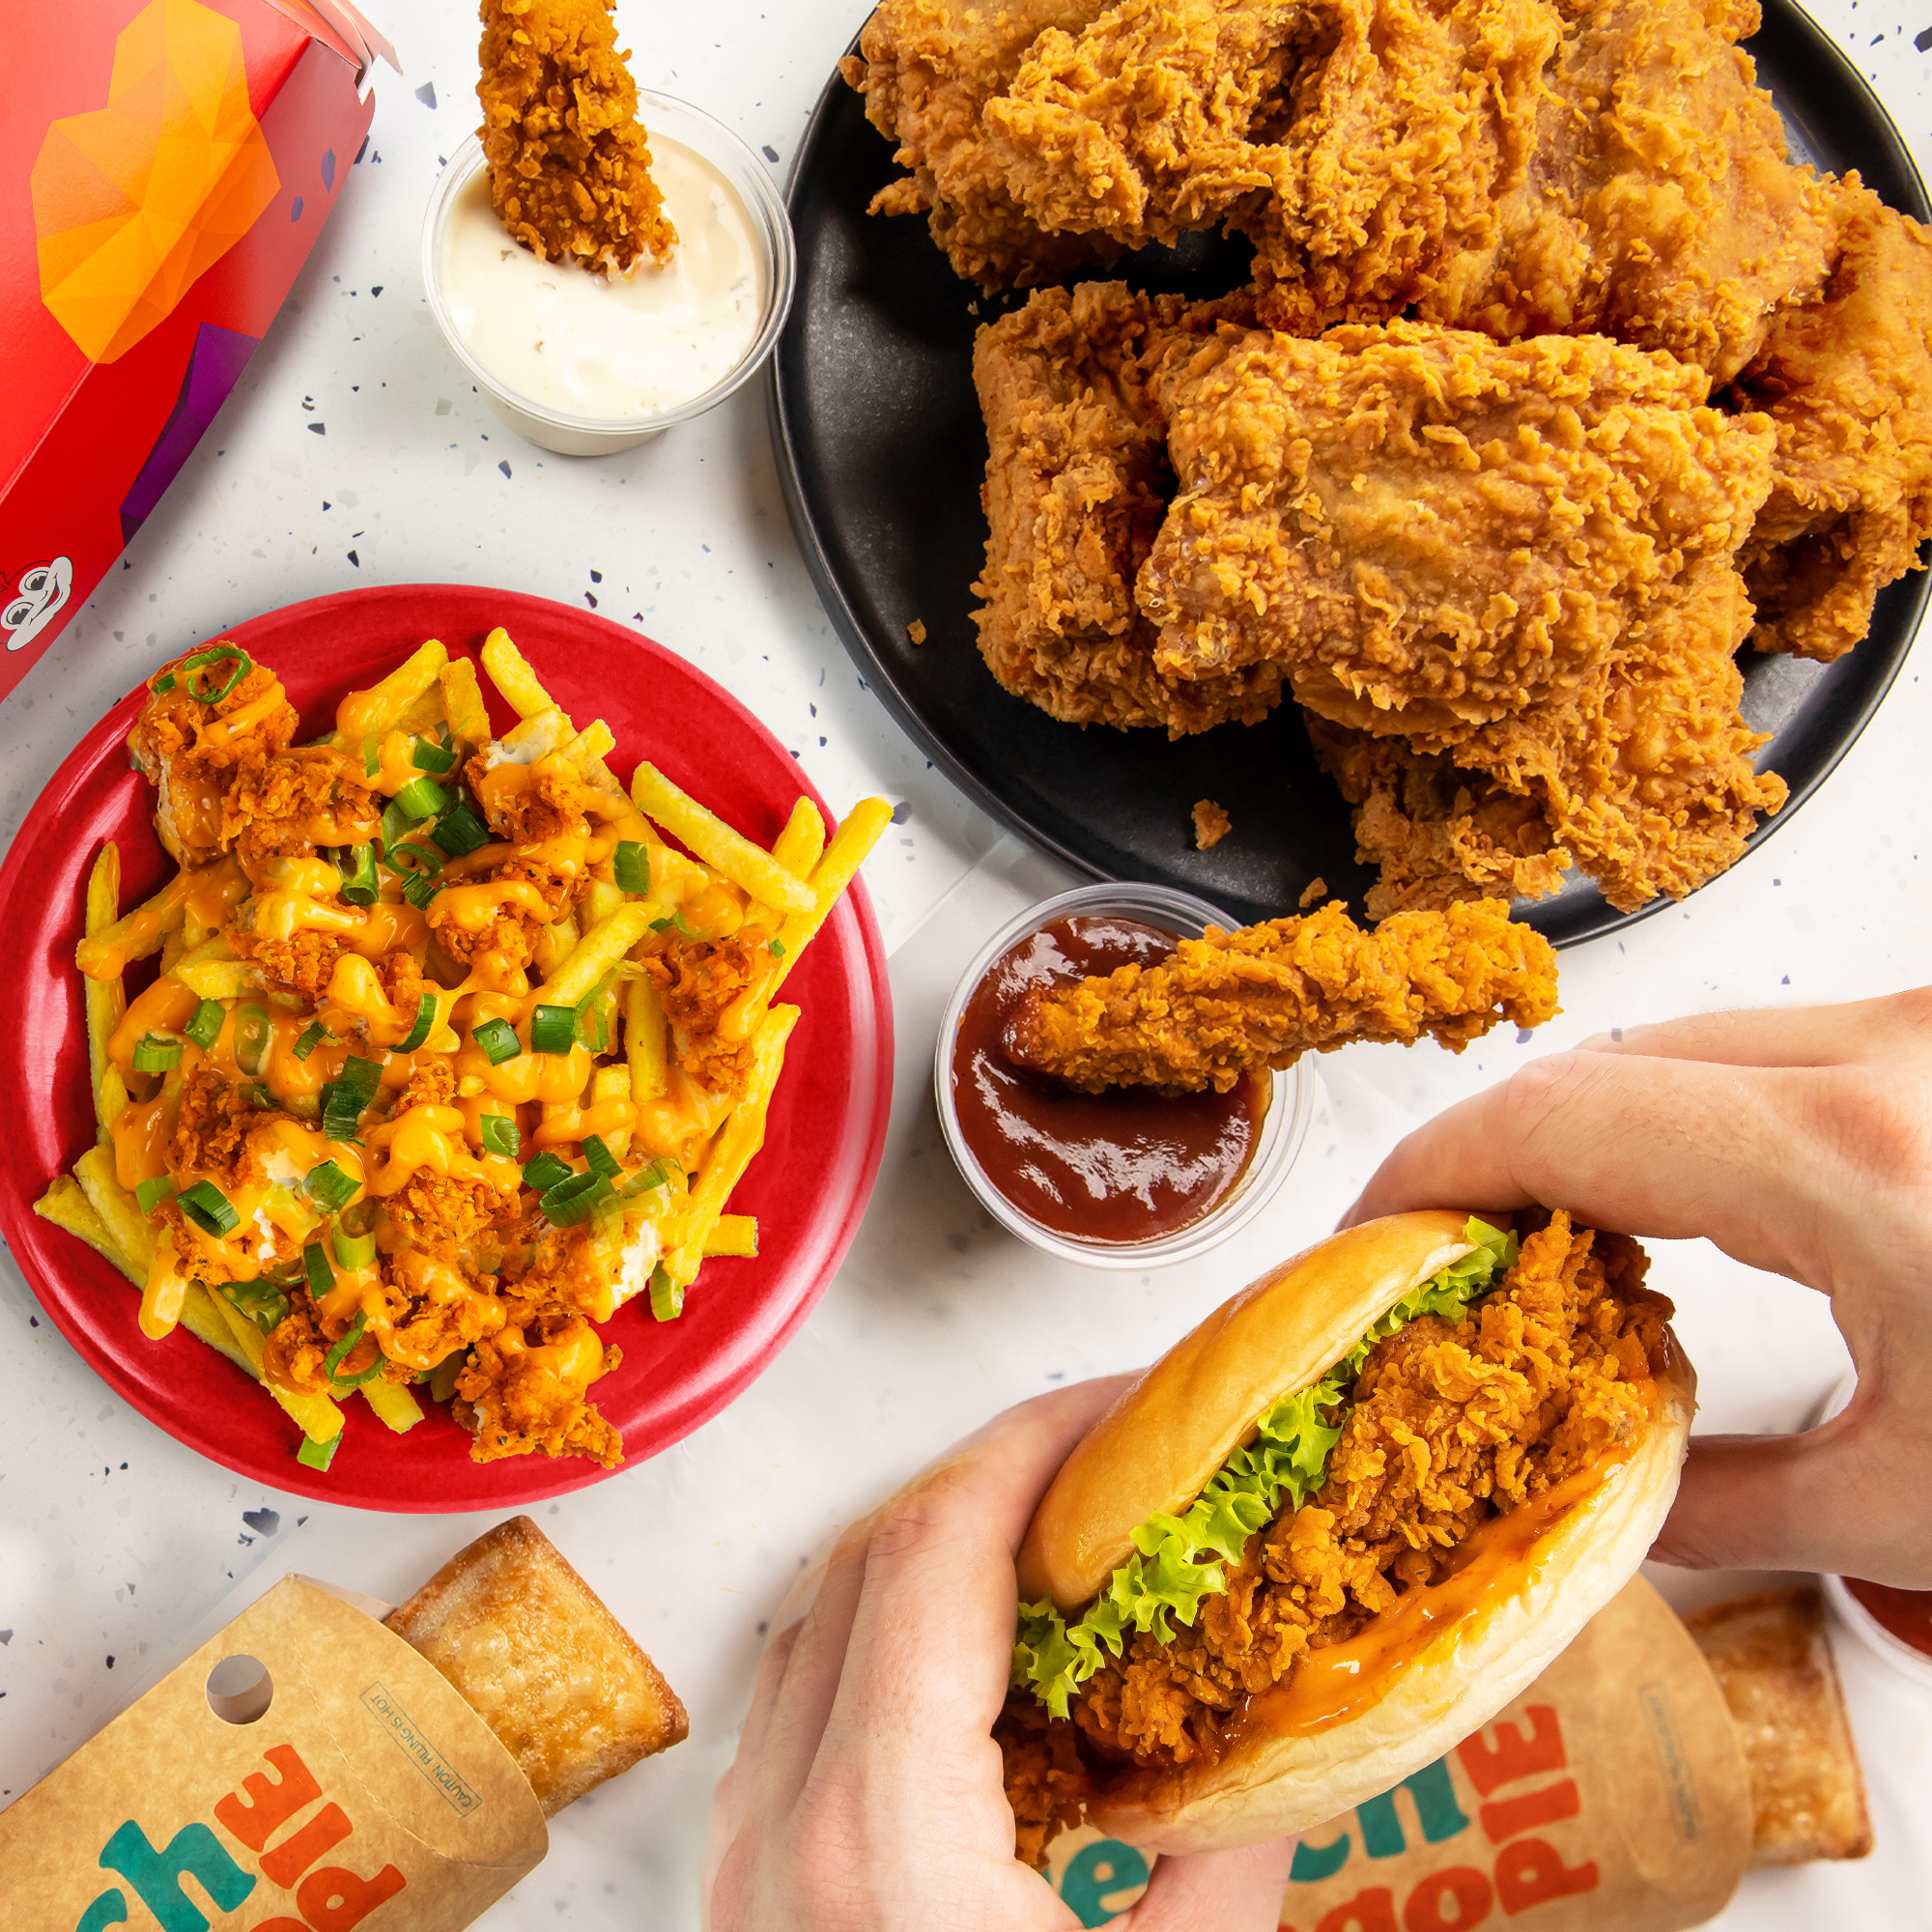 Bestsellers Chickenjoy fried chicken, Chicken Sandwich, and Peach Mango Pie continue to win over UK consumers